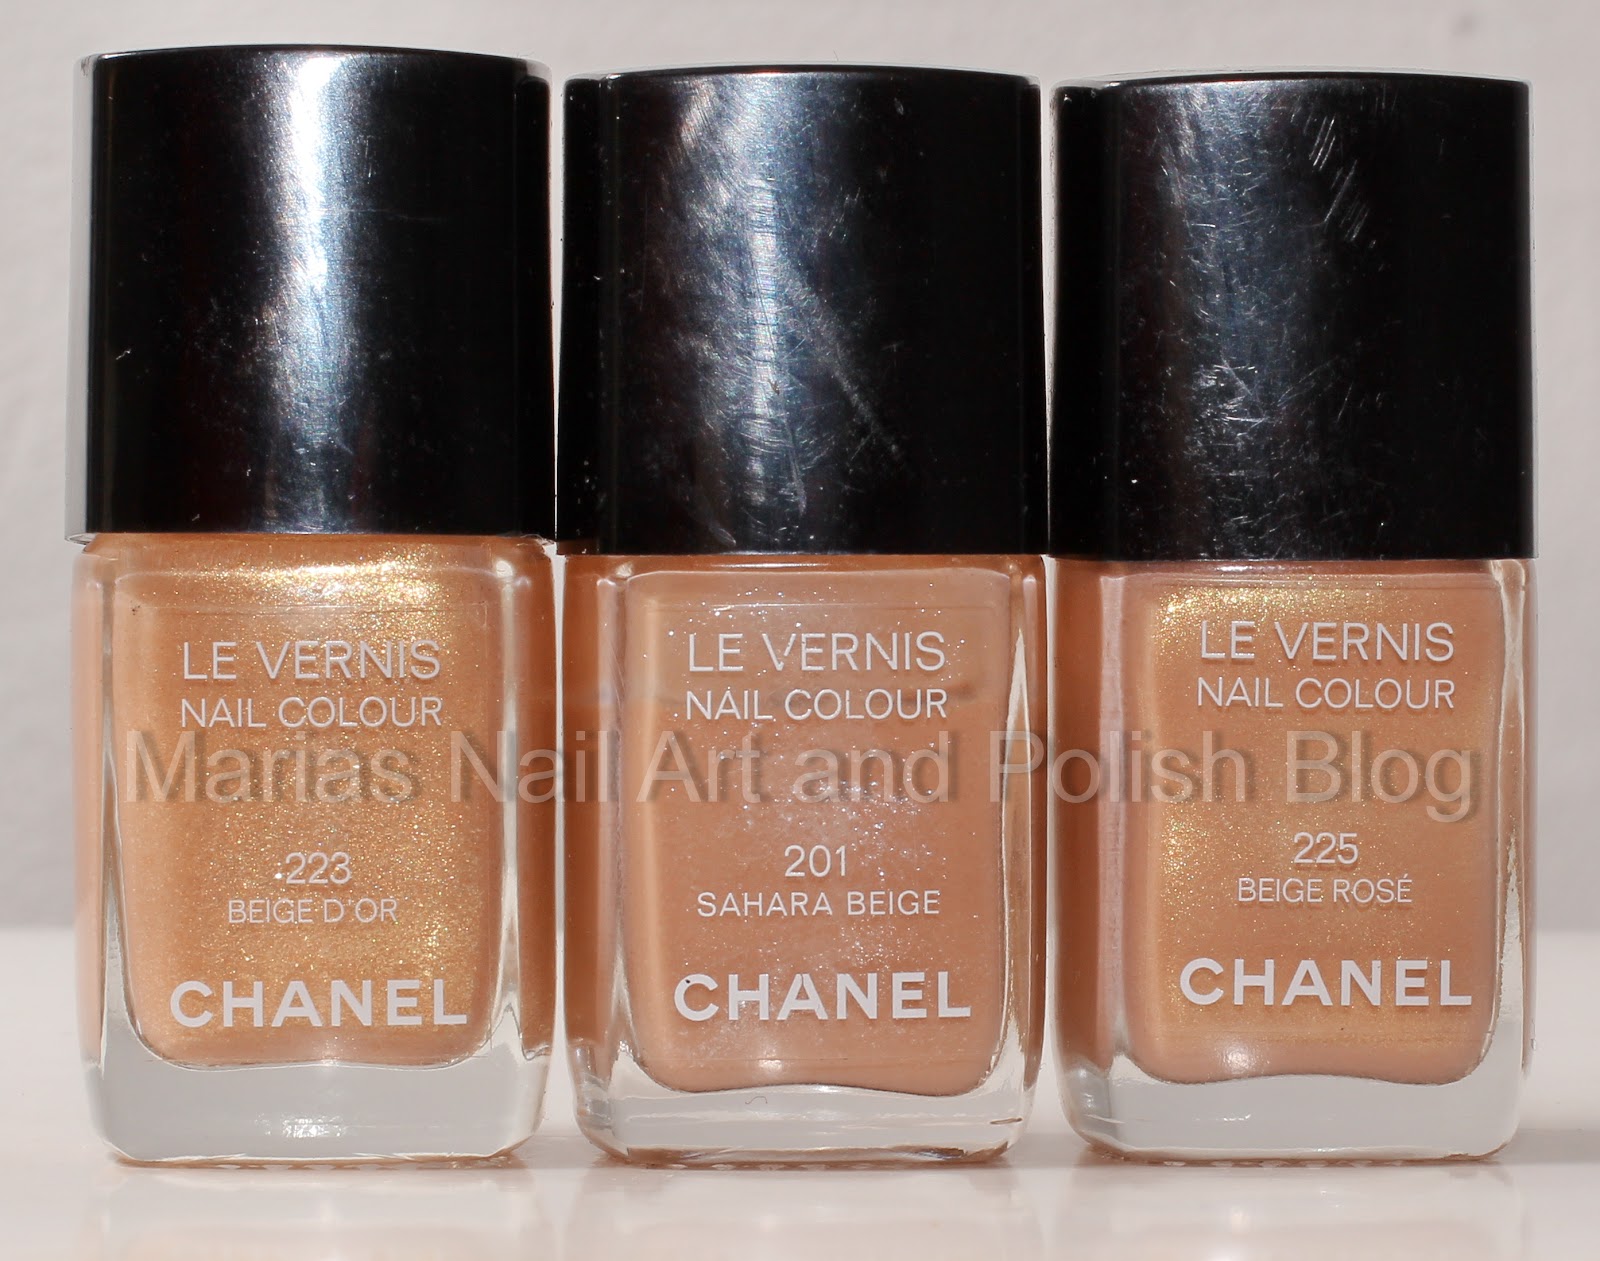 CHANEL GOLDEN SAND similar with a mixed SAHARA BEIGE 201 